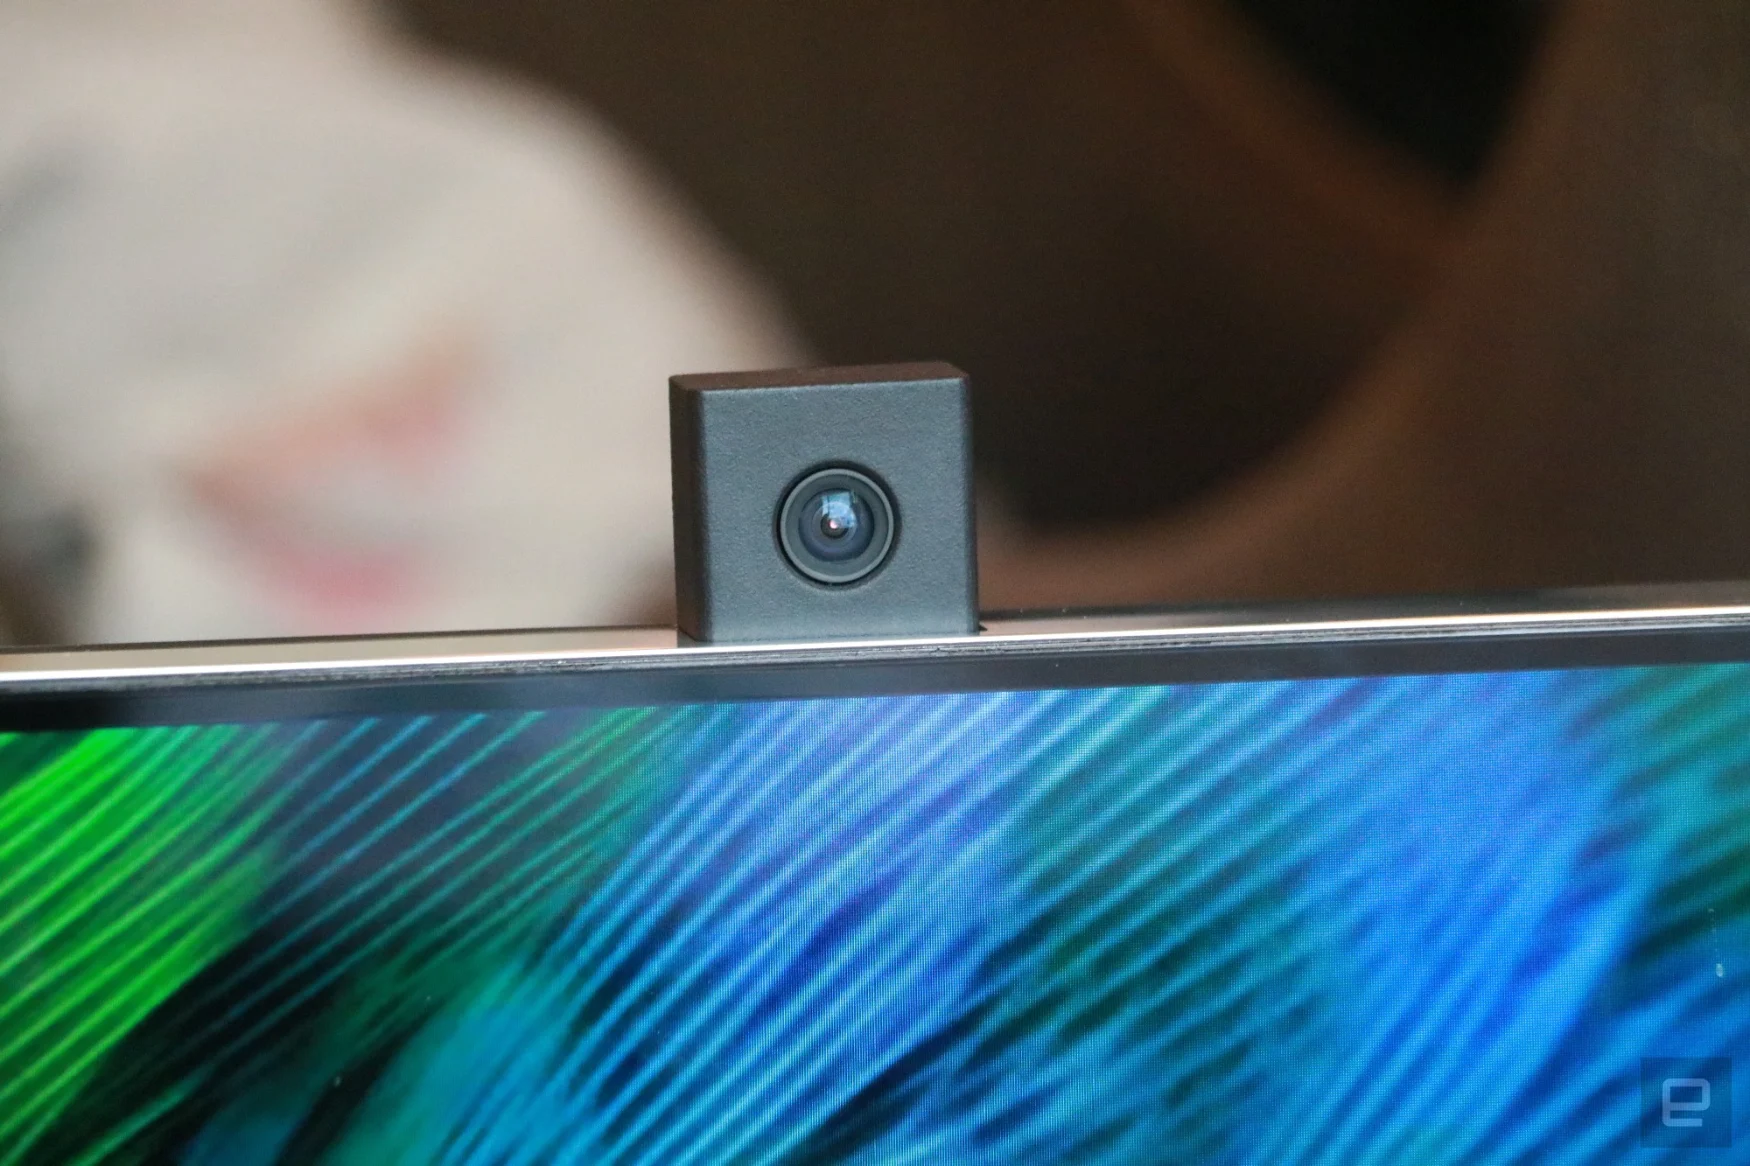 A close-up of the pop-up camera built into the top of the Displace TV.